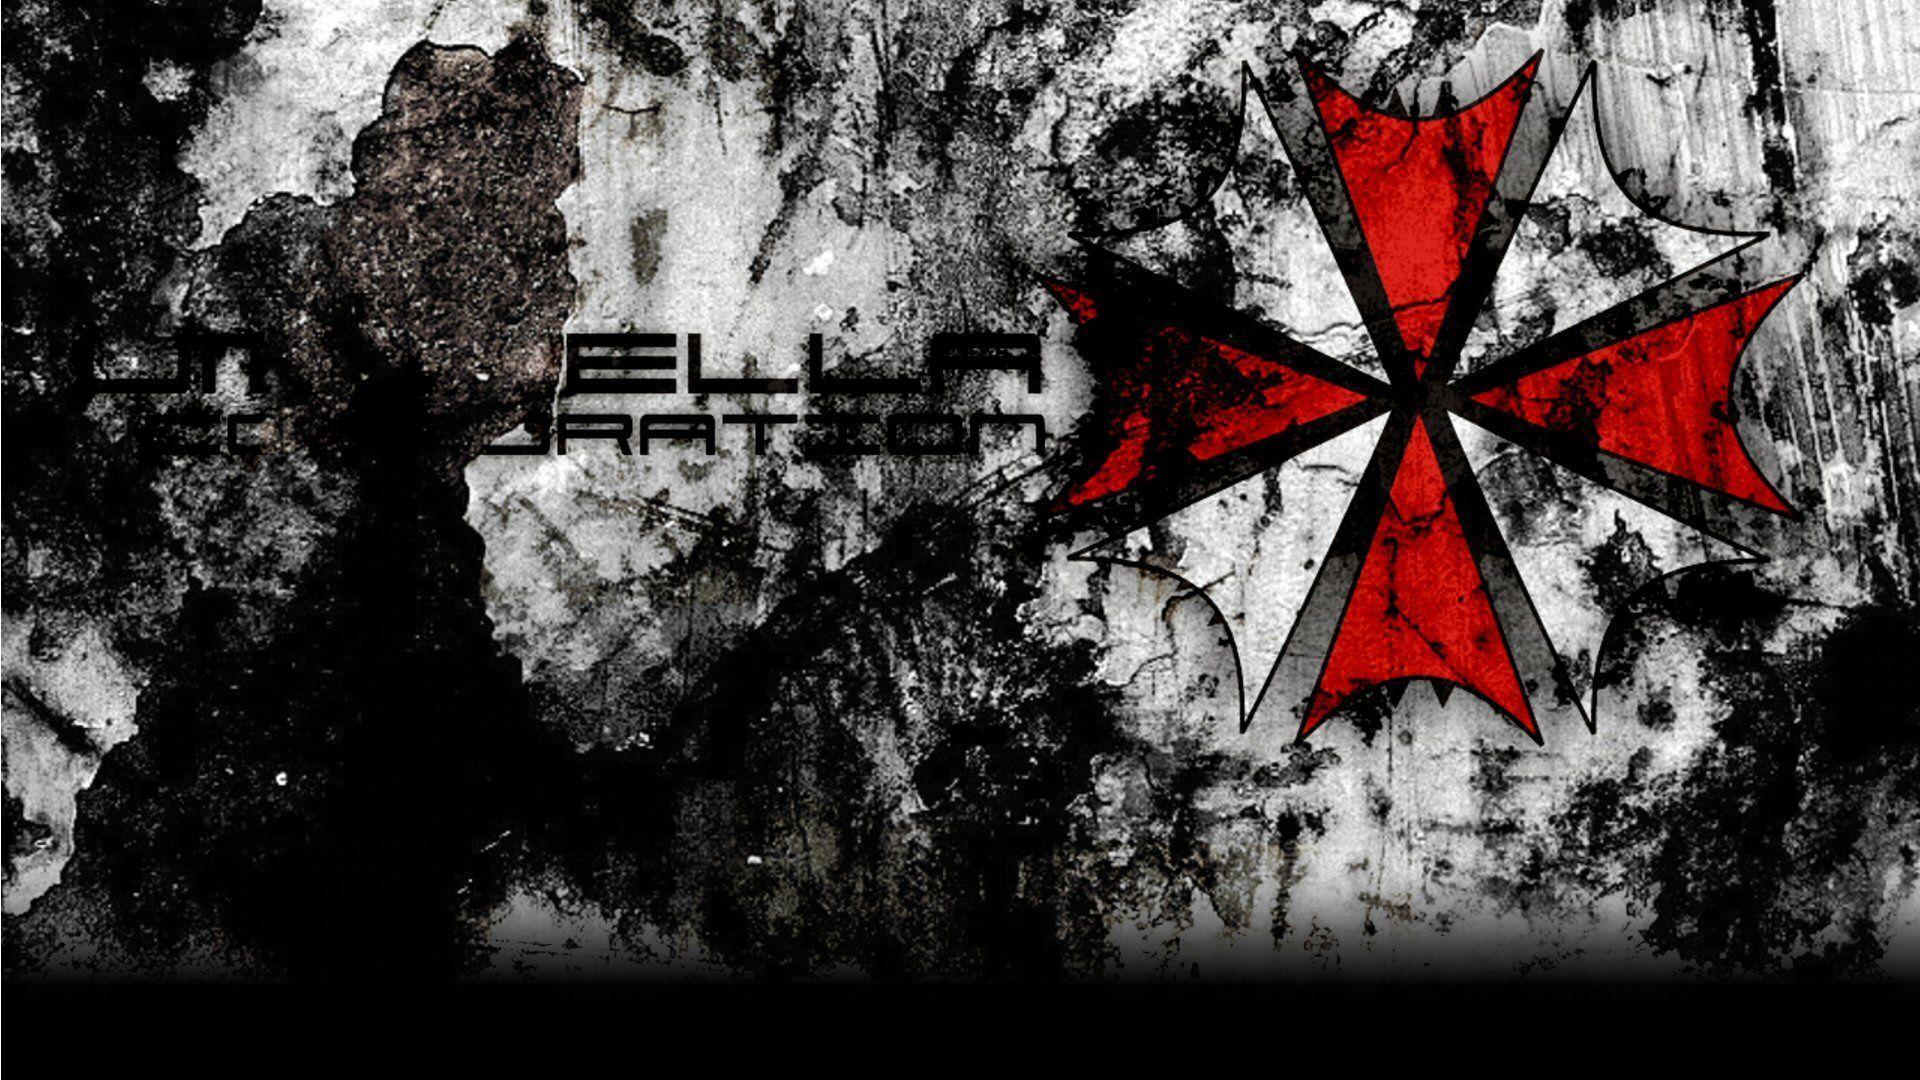 resident evil wallpaper Search Engine